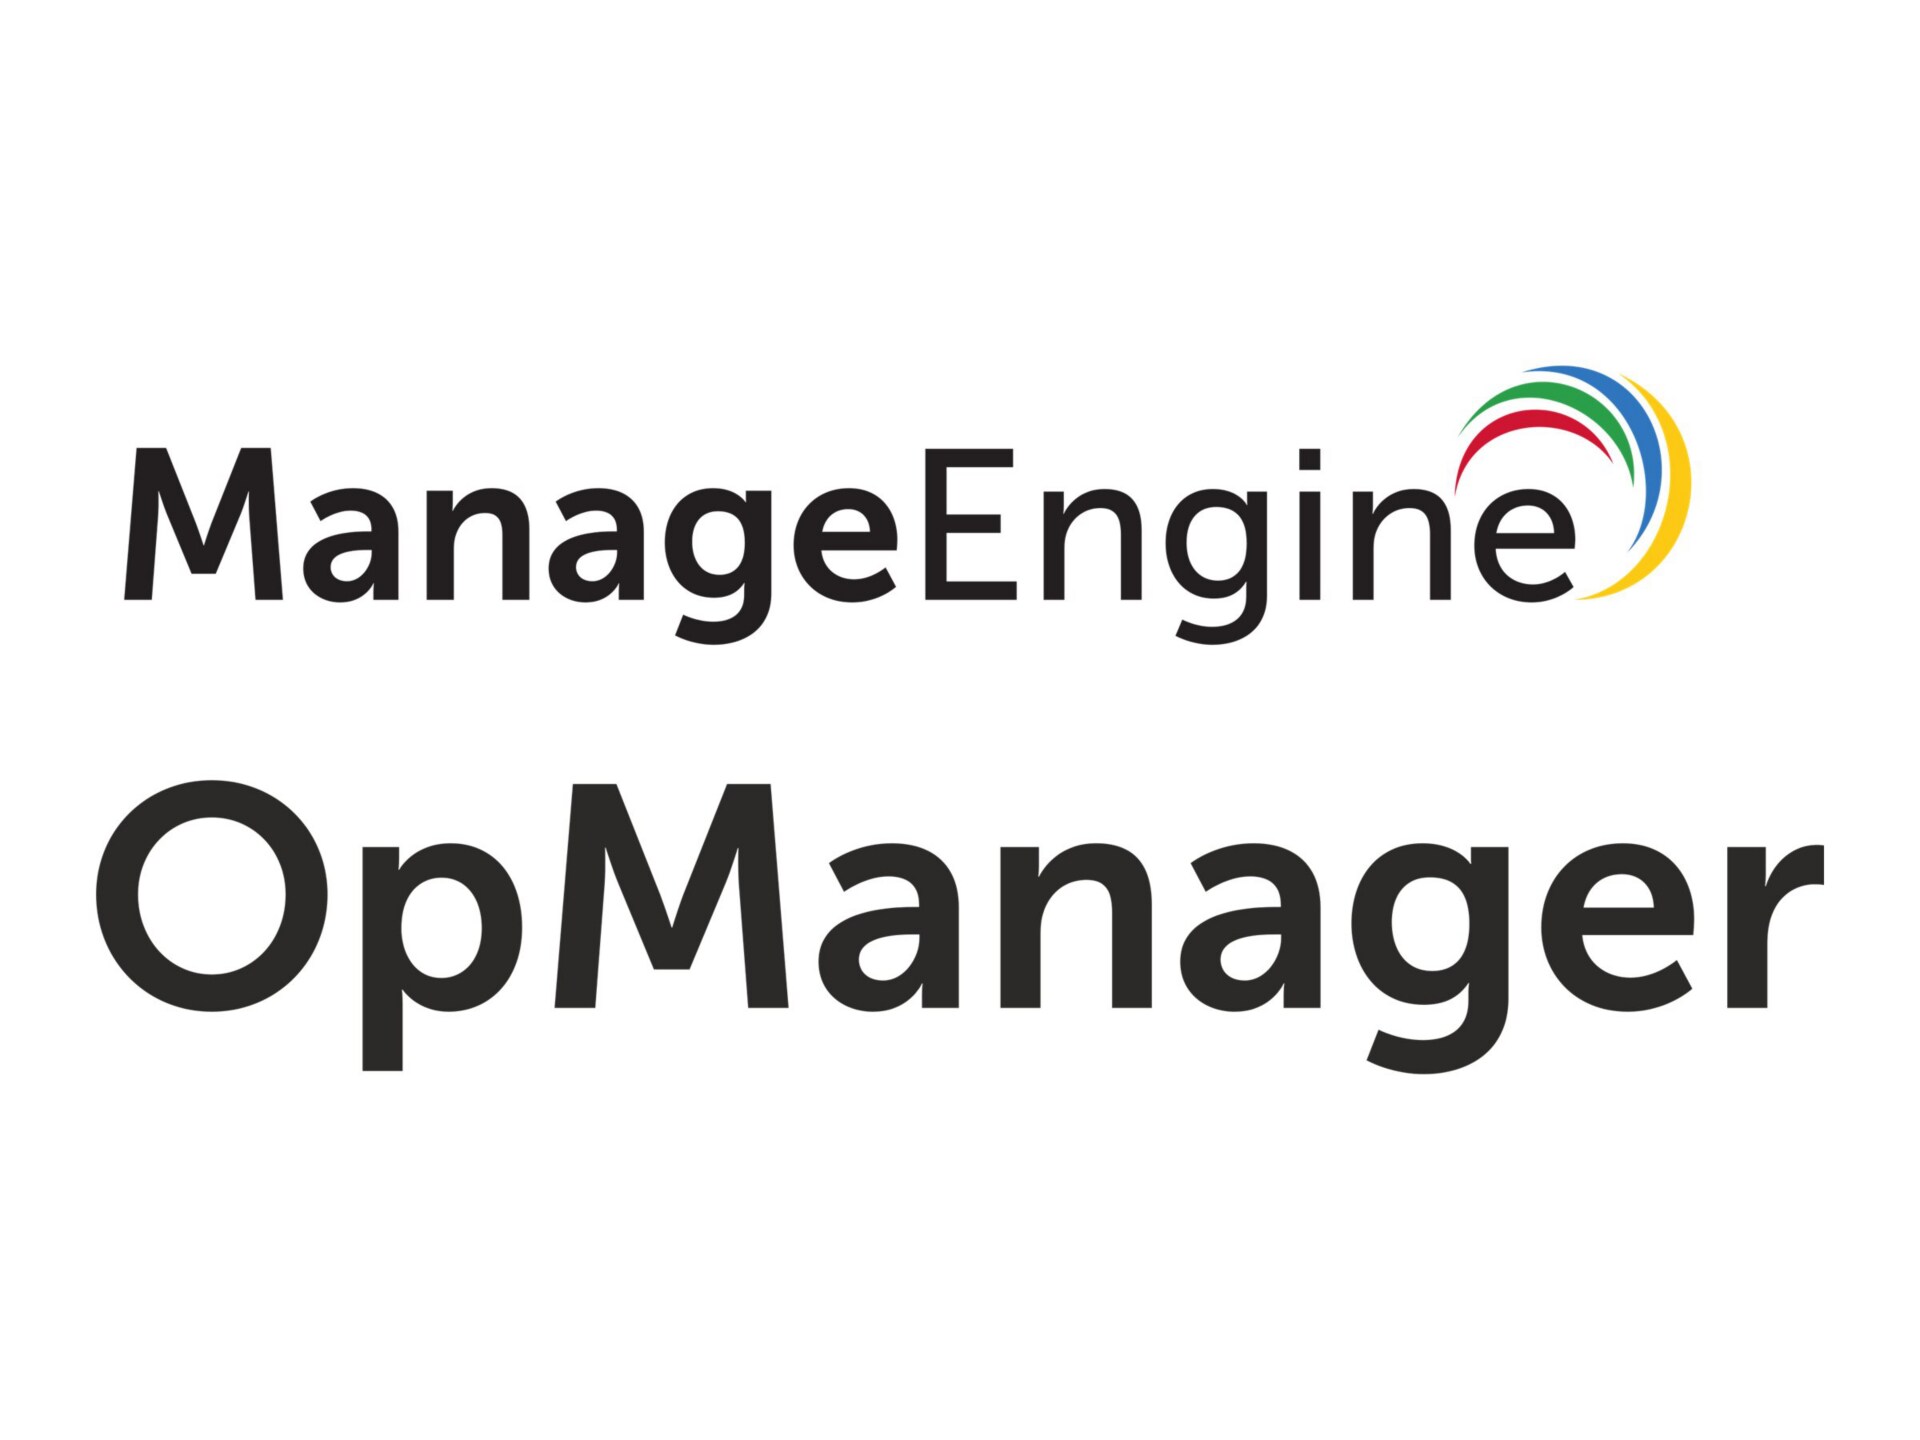 ManageEngine OpManager - Single Installation License - 10 additional users